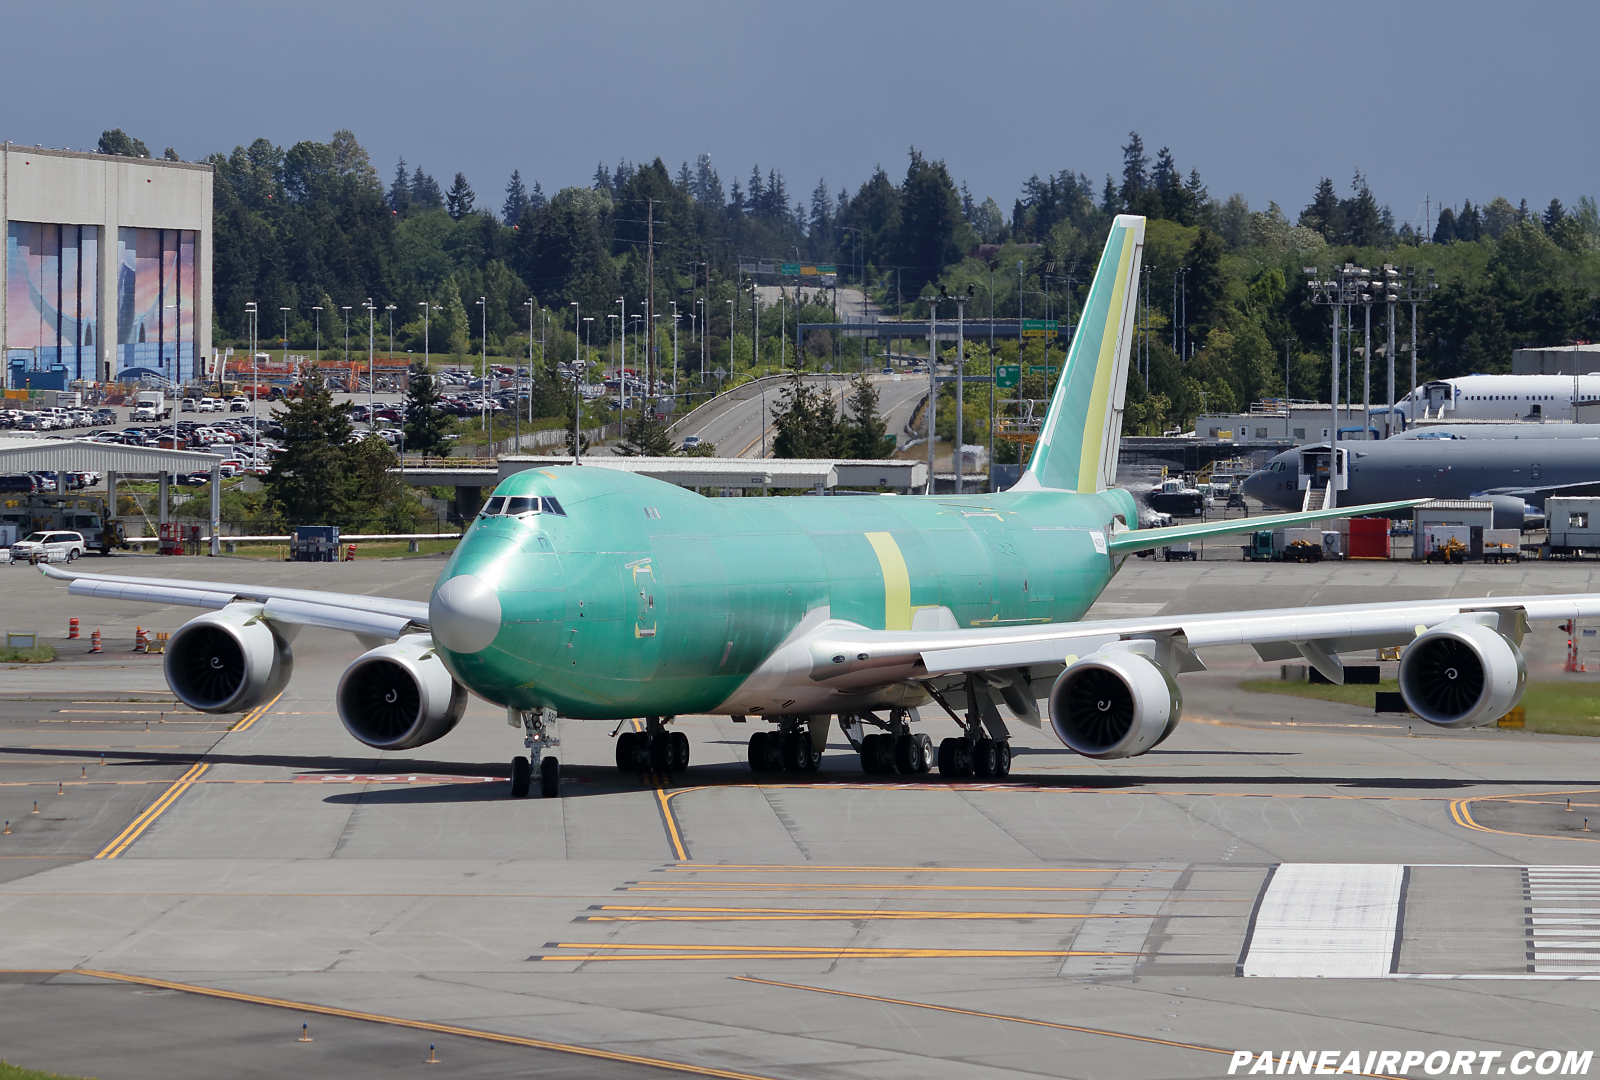 UPS 747-8F N628UP at KPAE Paine Field